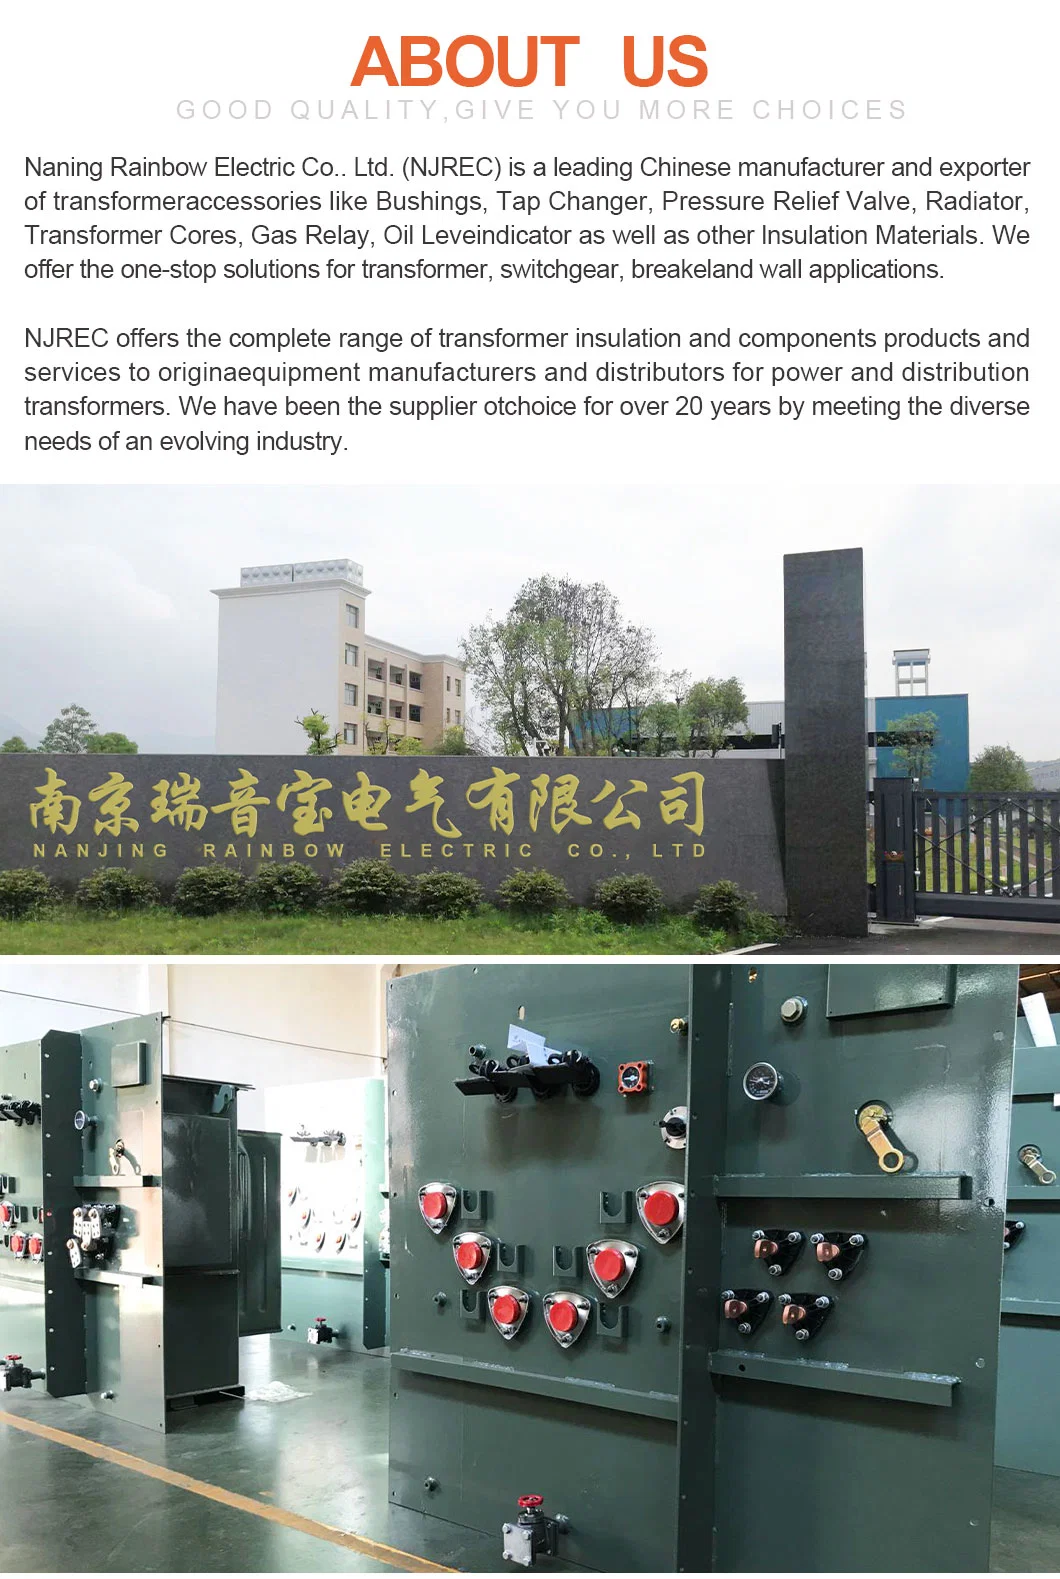 Two-position Sidewall Oil-immersed Load Switch components of Pad Mounted Transformer